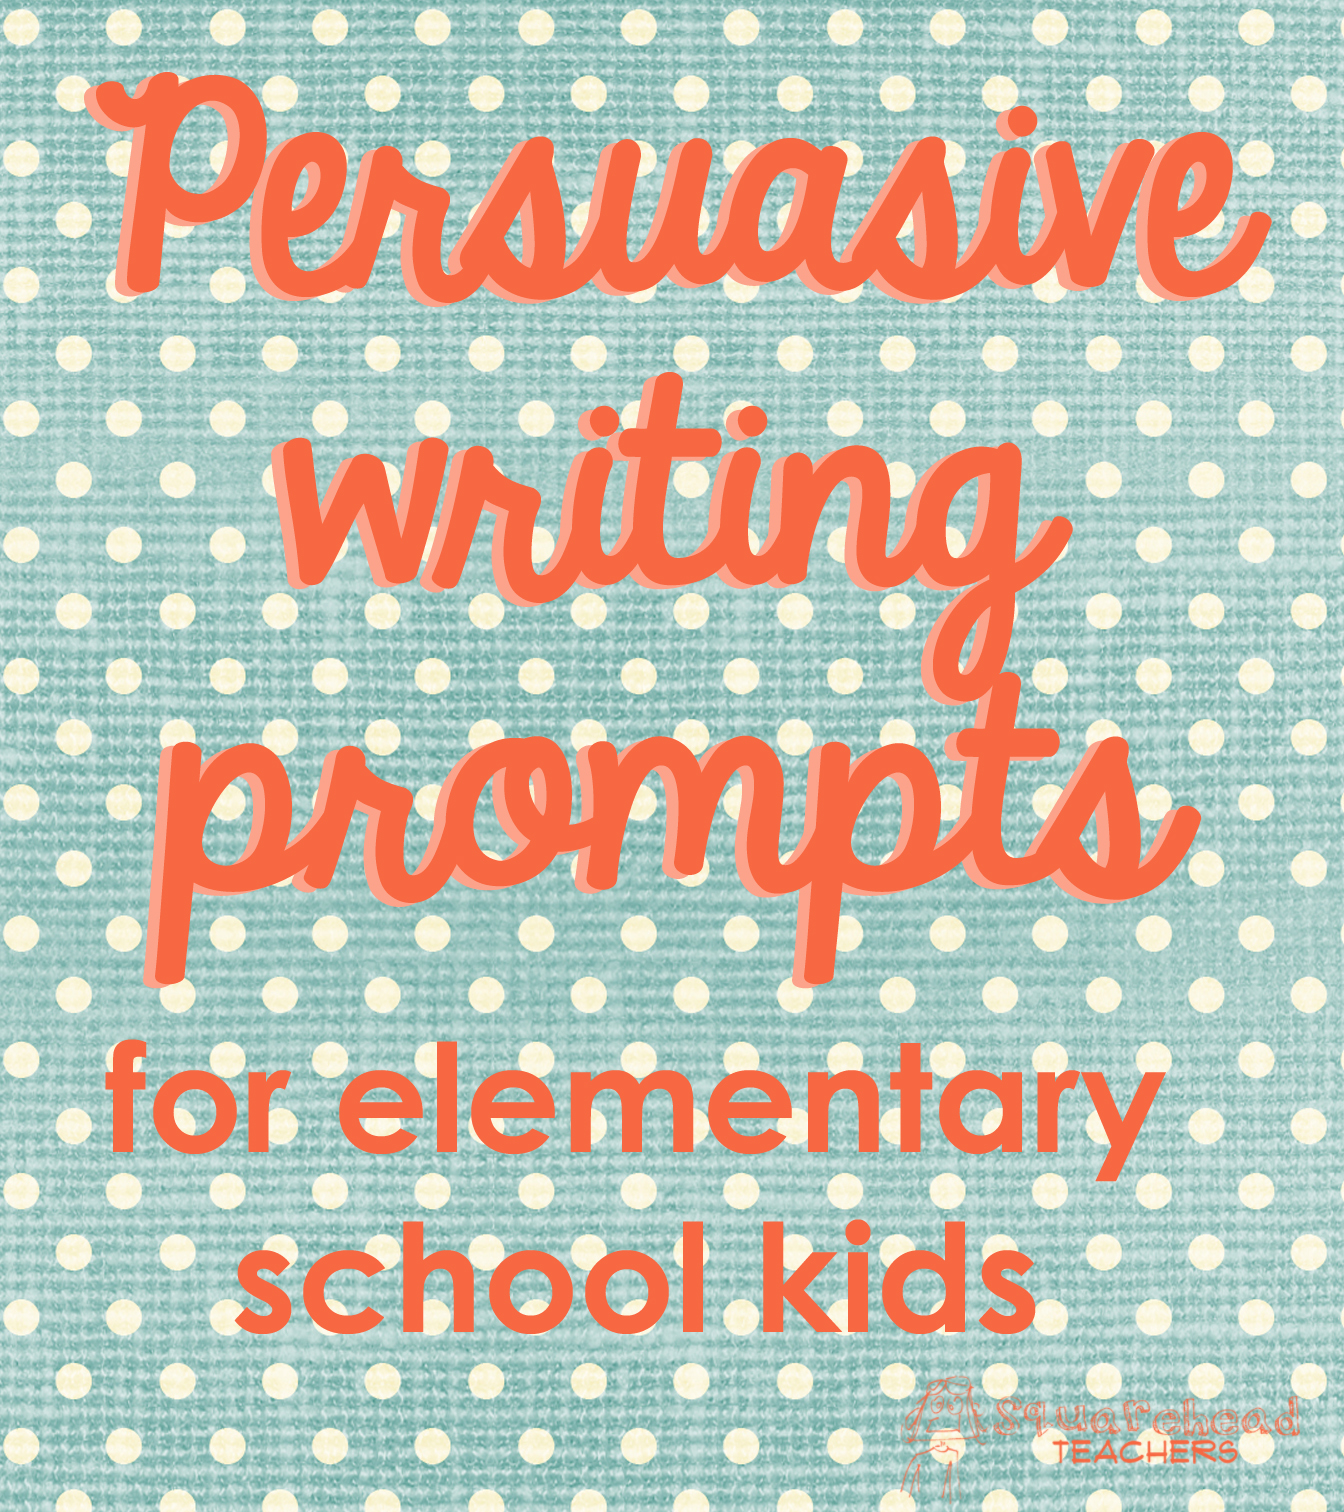 Best Argumentative Essay Topics For Elementary Students